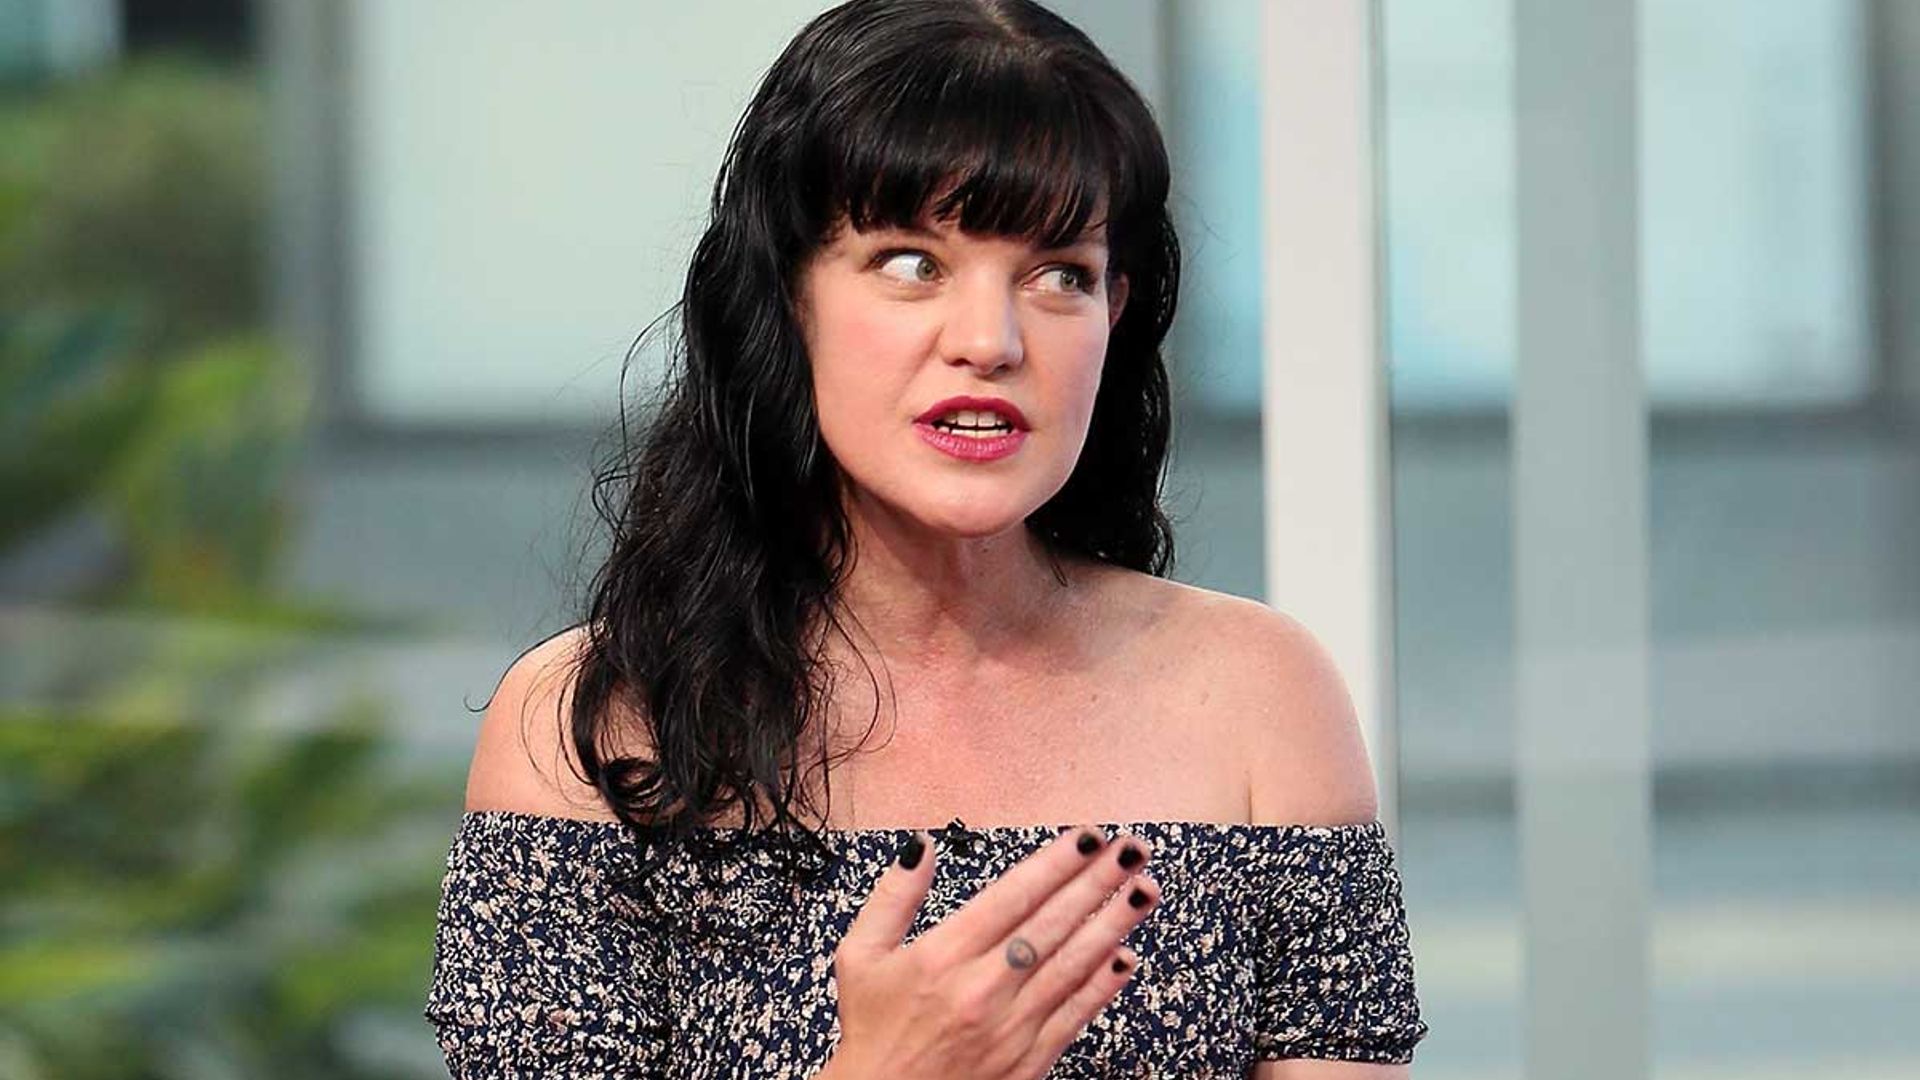 NCIS' Pauley Perrette lashes out in scathing verbal attack but fans